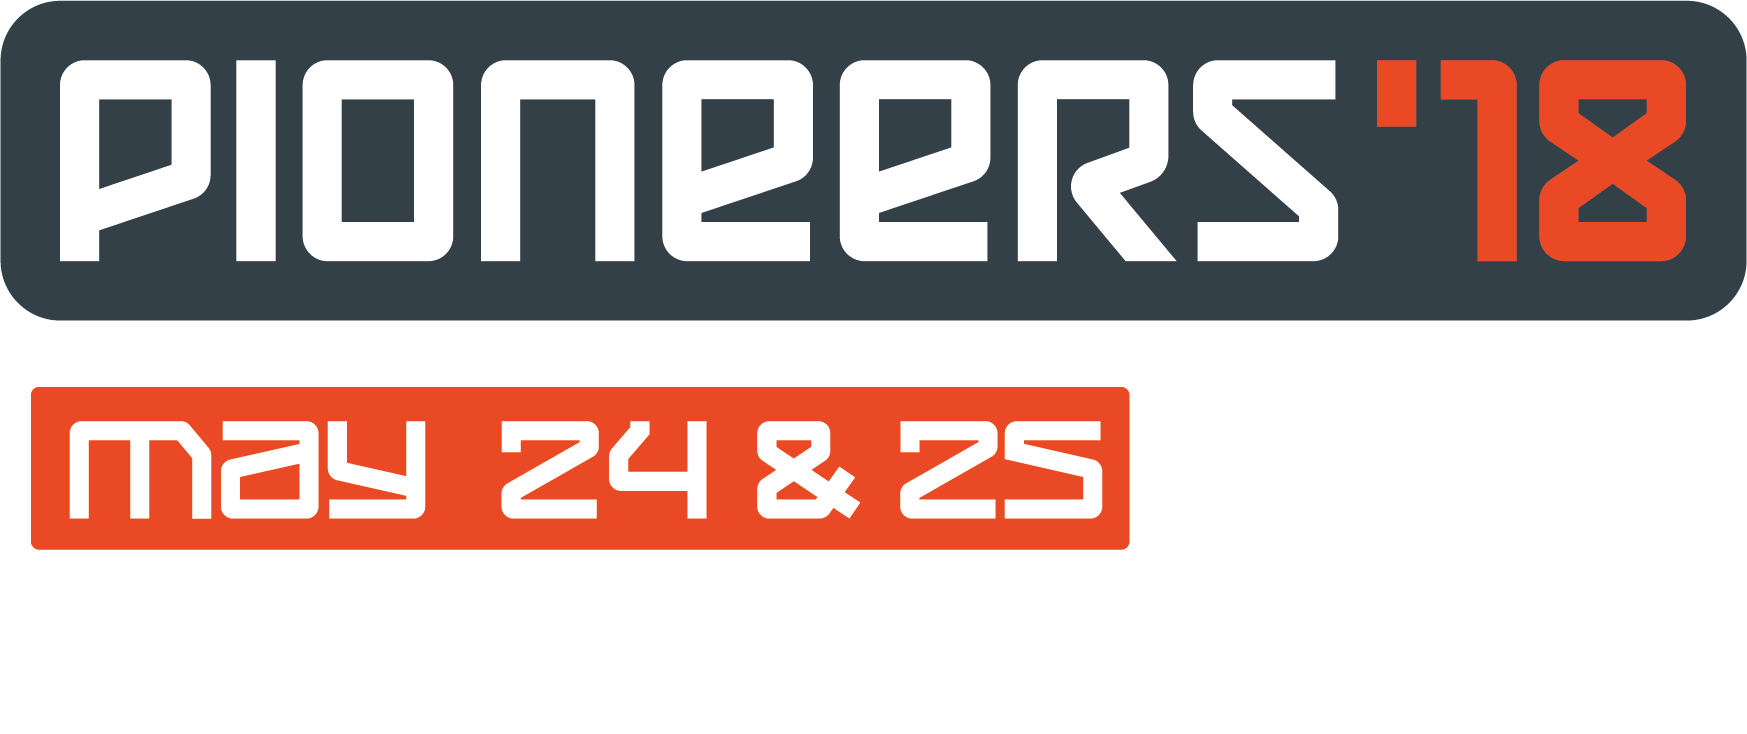 Blurred Frontiers - Pioneers 2018 (1747x734), Png Download